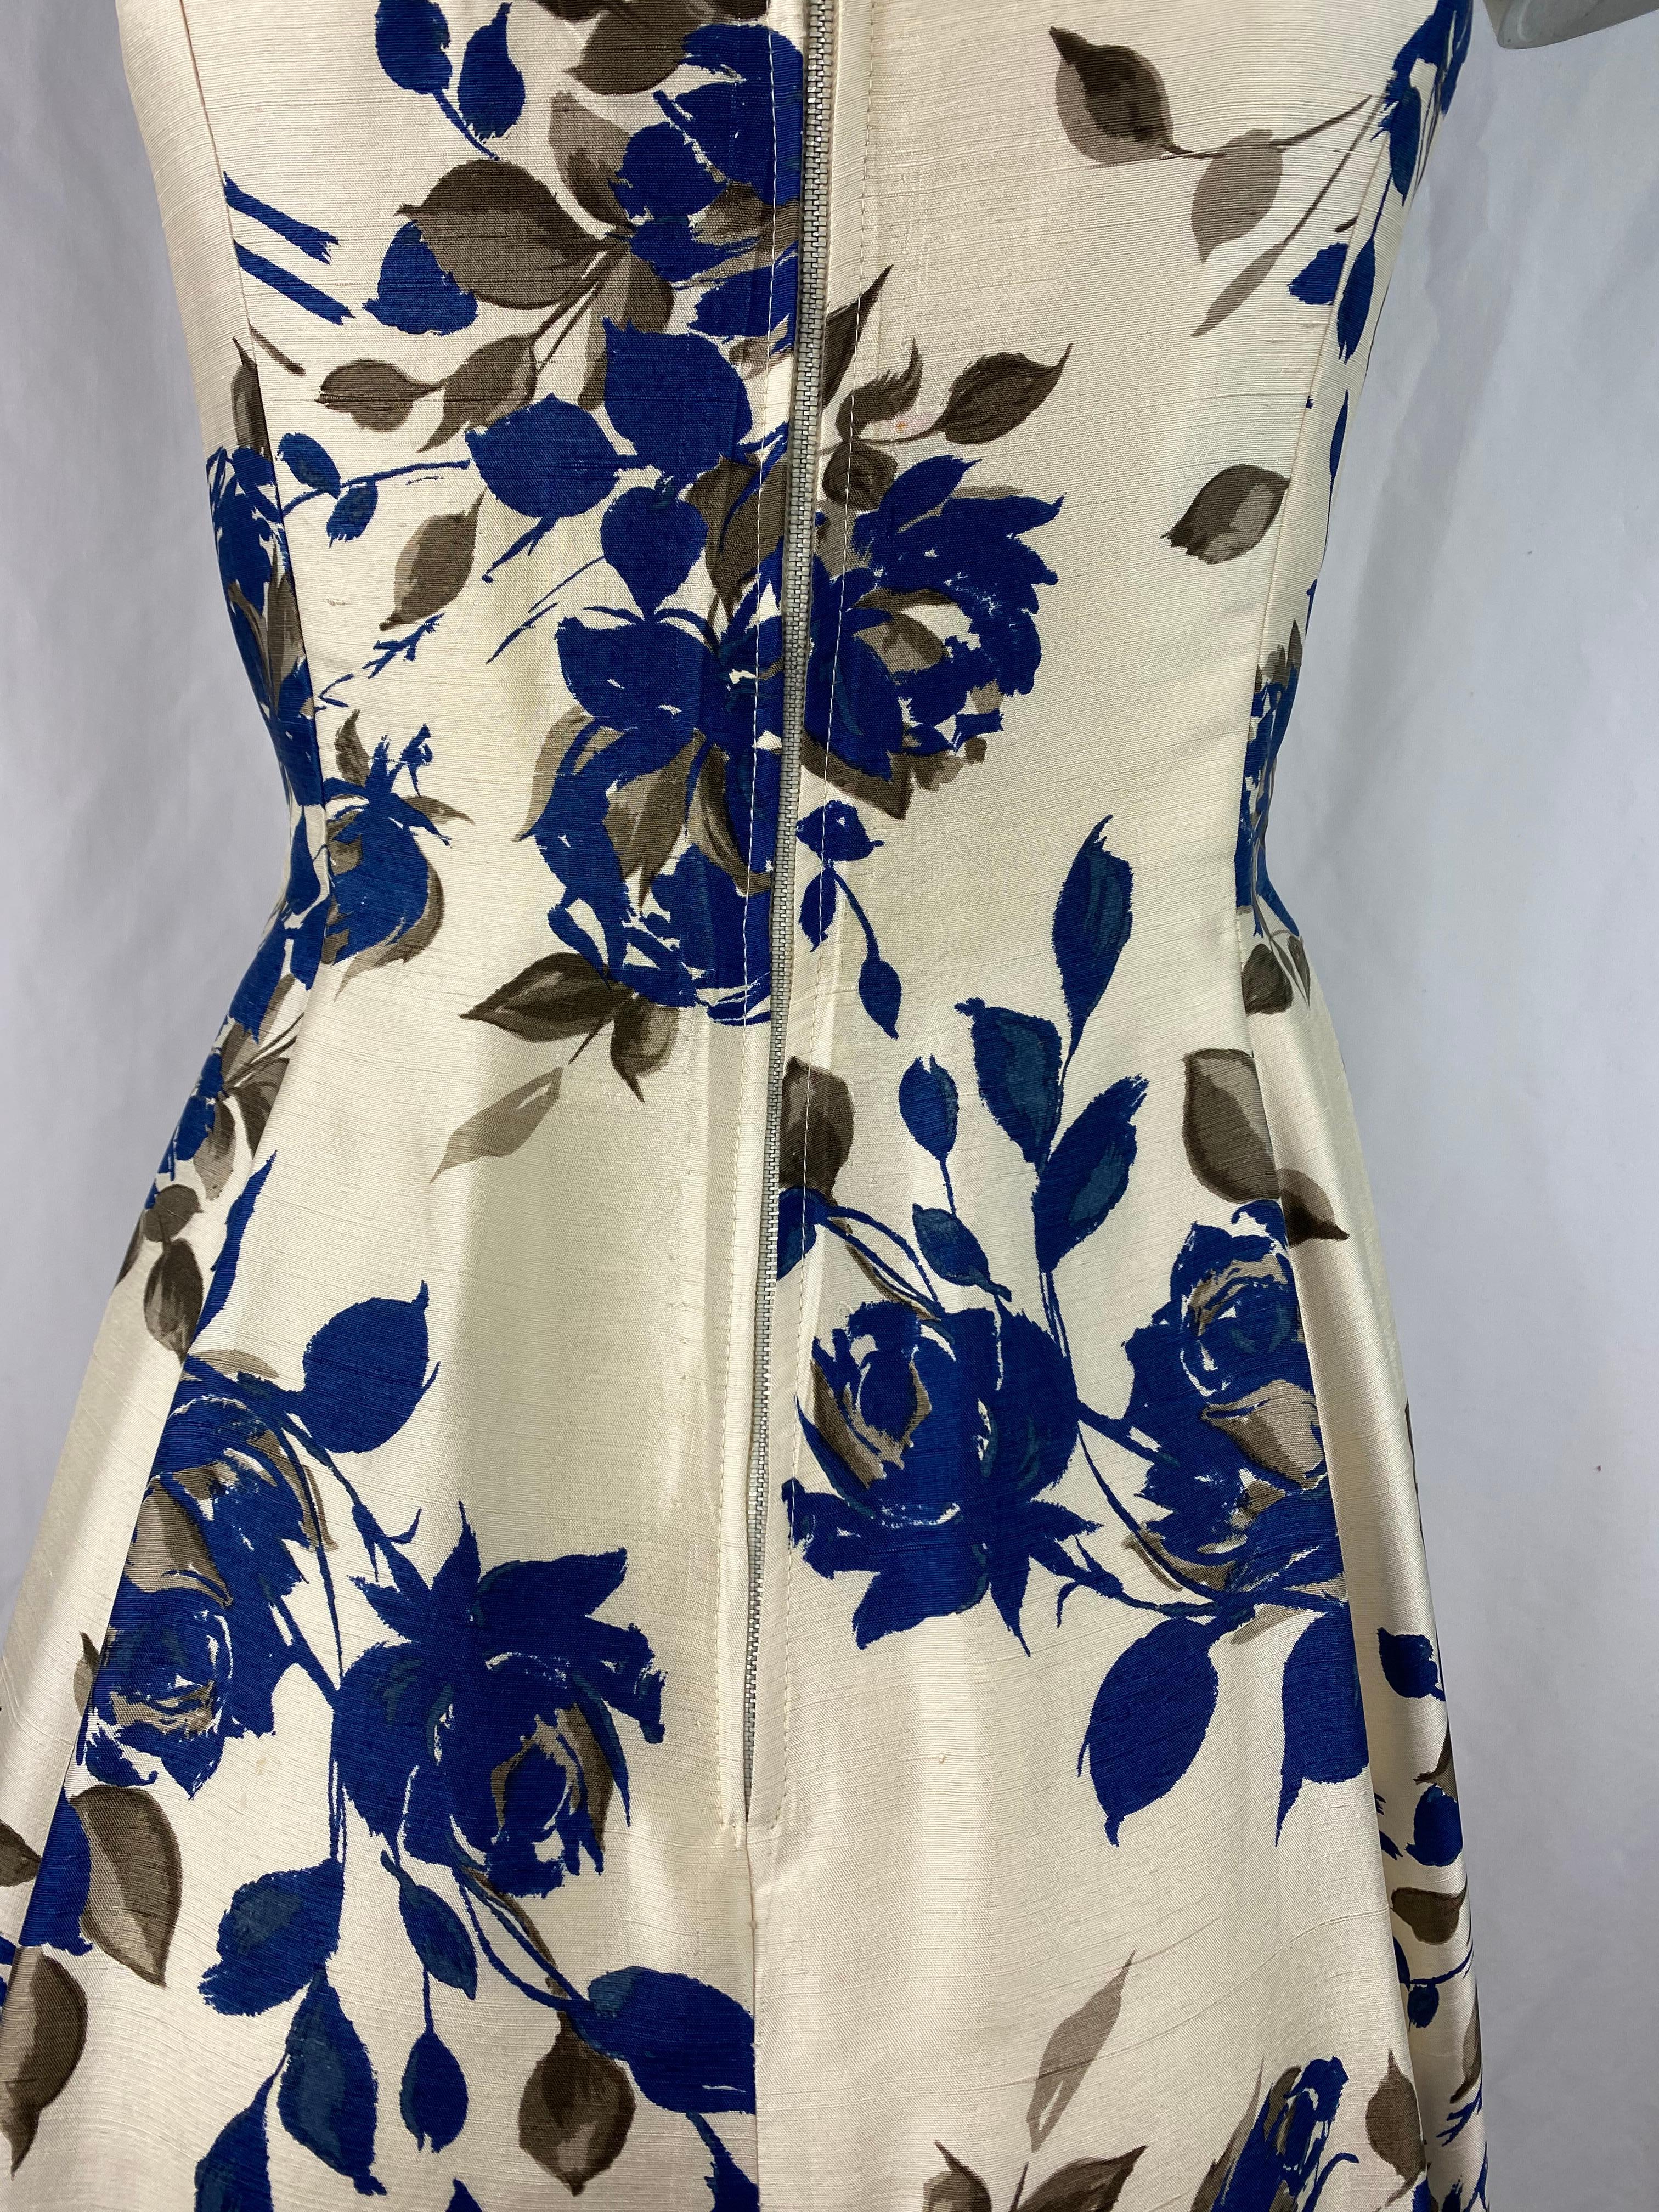 Women's Marwi Cream and Navy Floral Sleeveless Dress, Size 40 For Sale